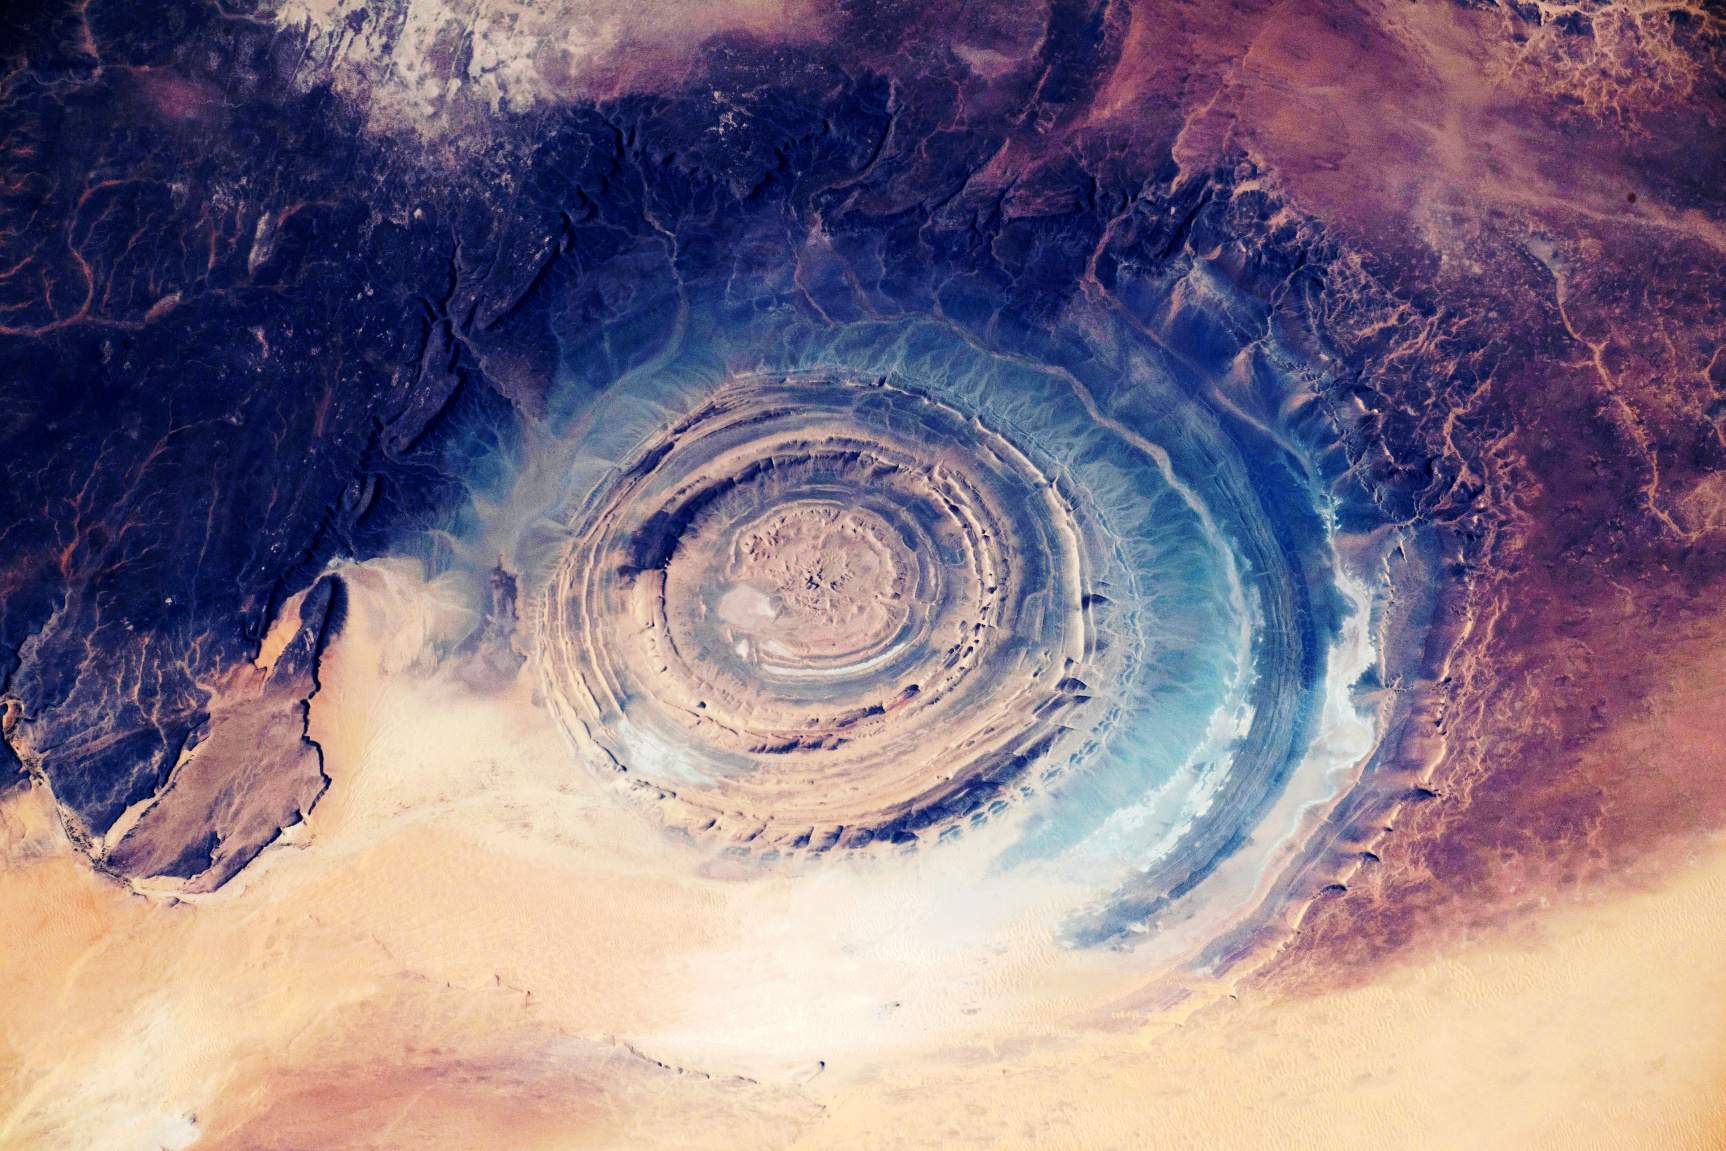 Richat strucuture: Is this Atlantis, hiding in plain sight in the Sahara? 3